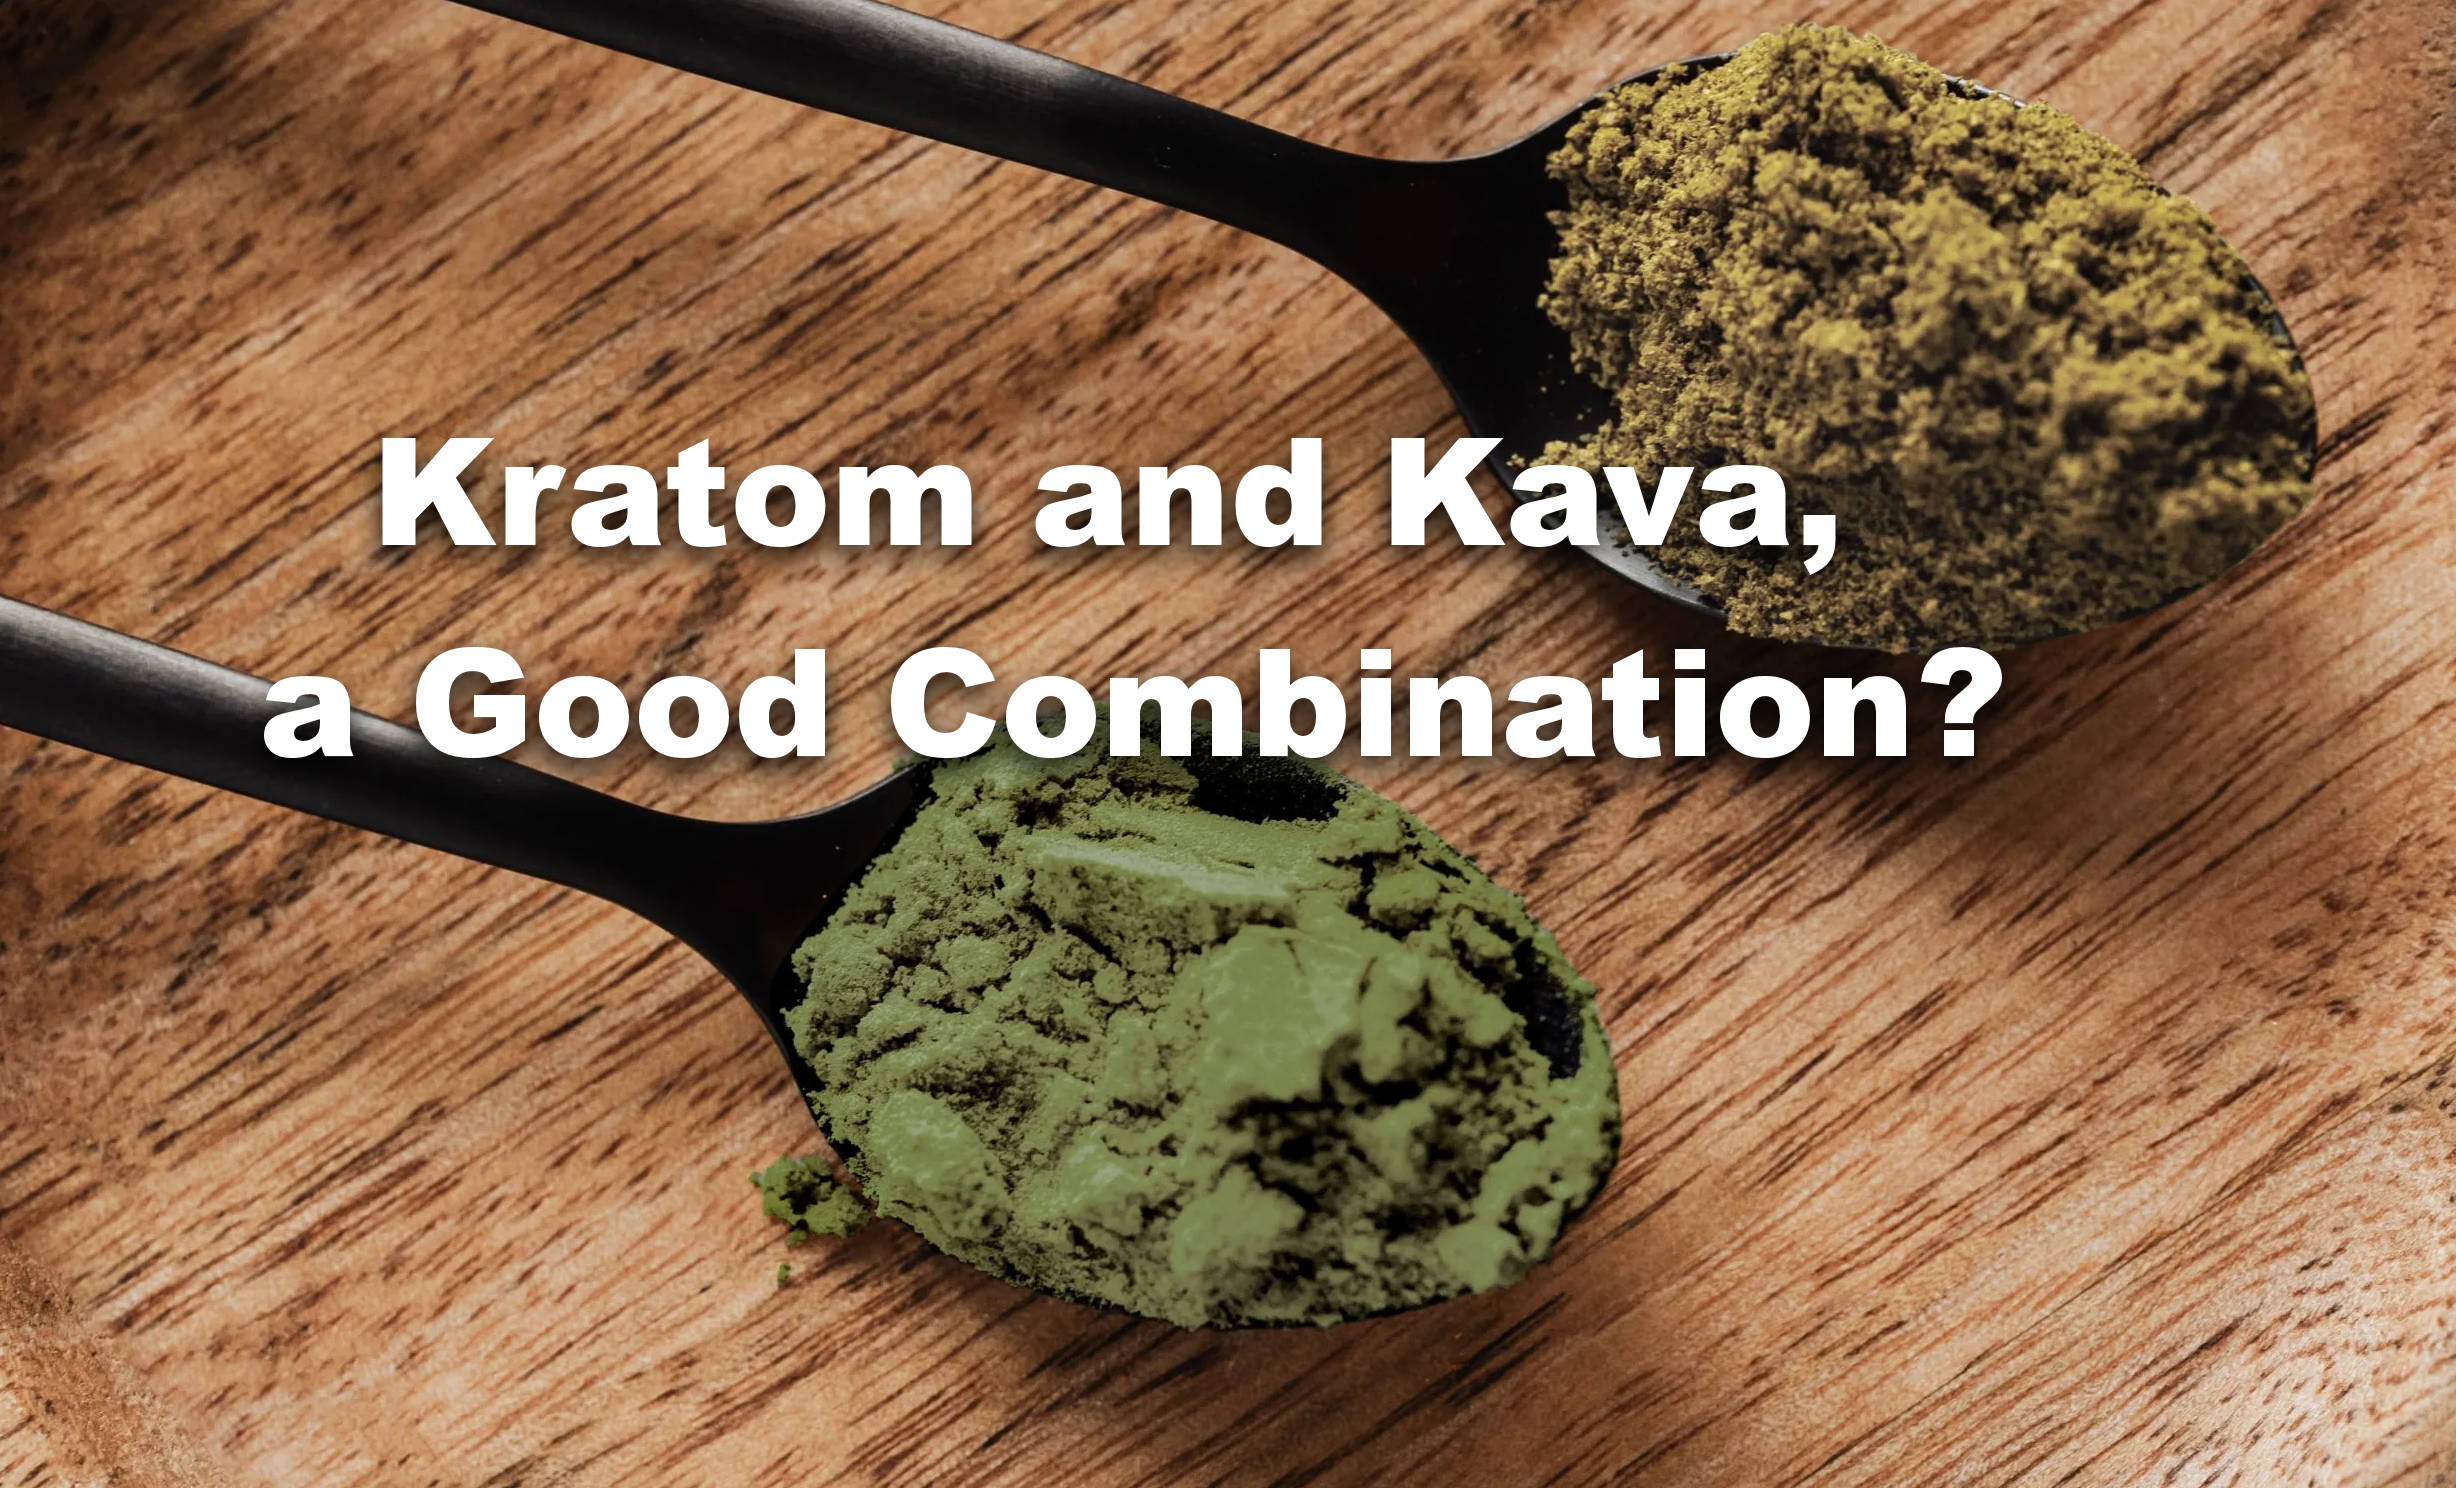 You are currently viewing Kratom and Kava, a Good Combination?